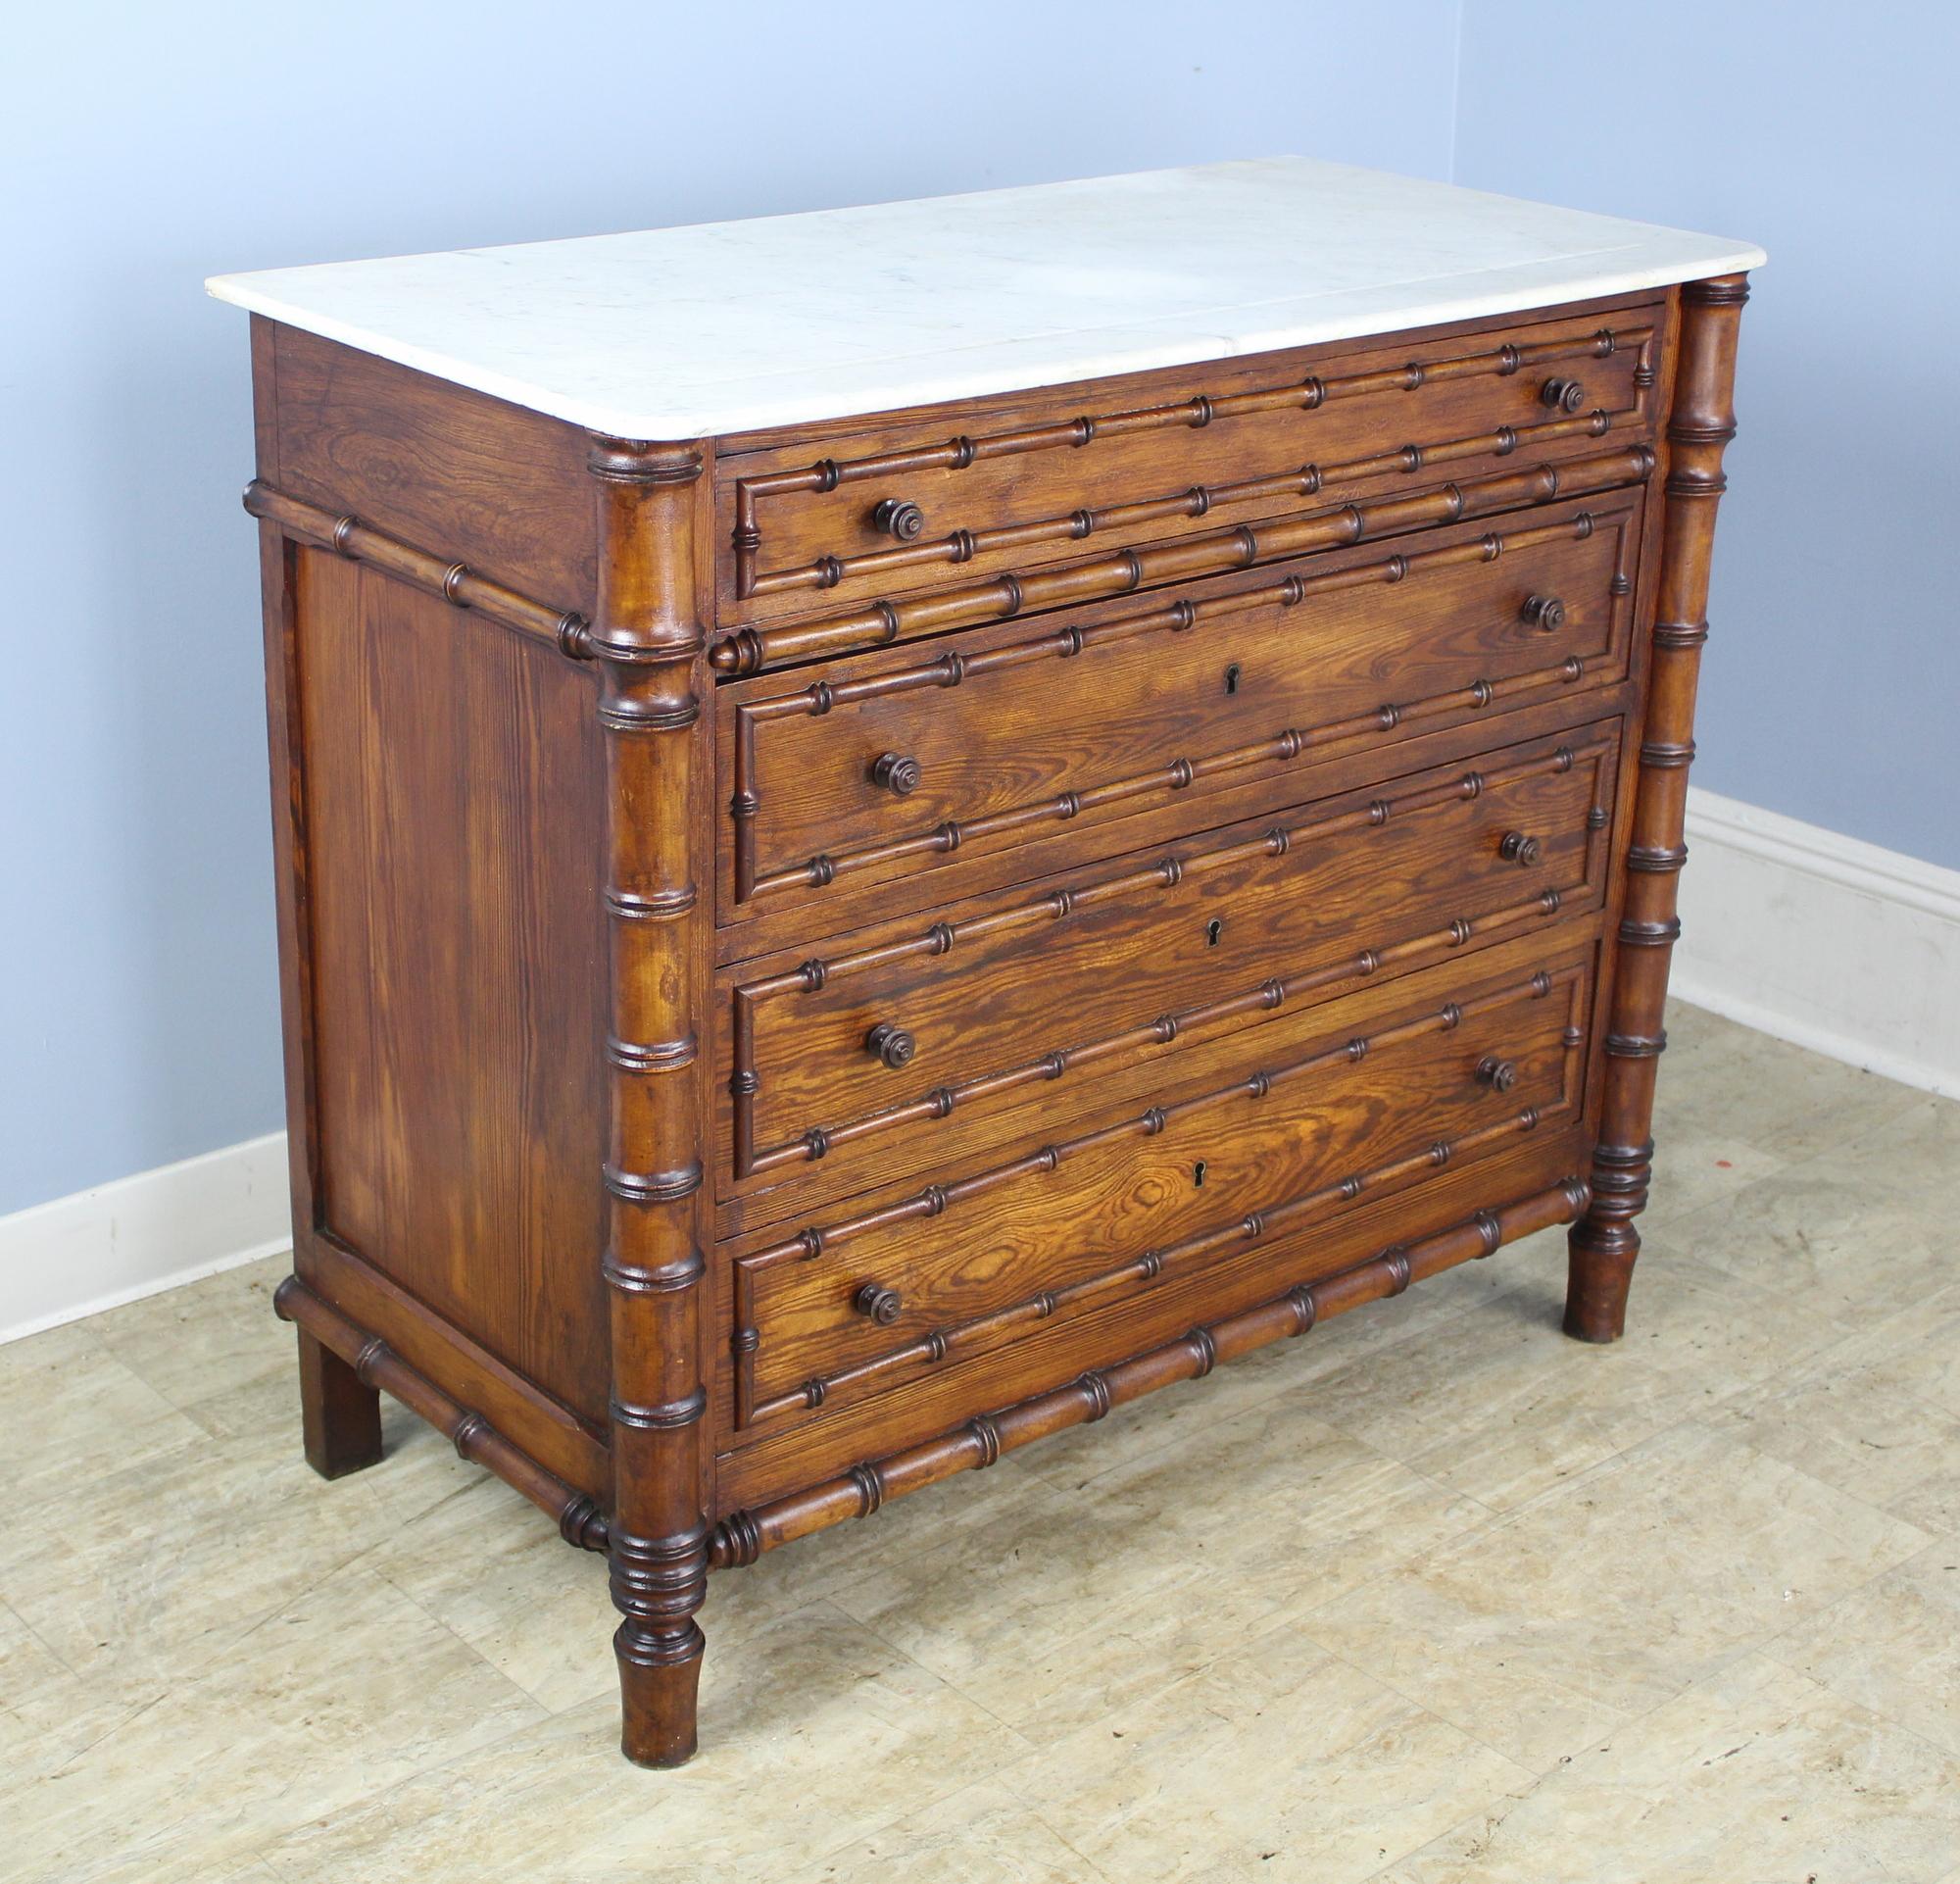 A charming chest of drawers with faux bamboo columns and mouldings. Four roomy drawers. The marble which is original is in good antique condition. There is a small crack at the back of the marble which has been repaired. The key opens all three